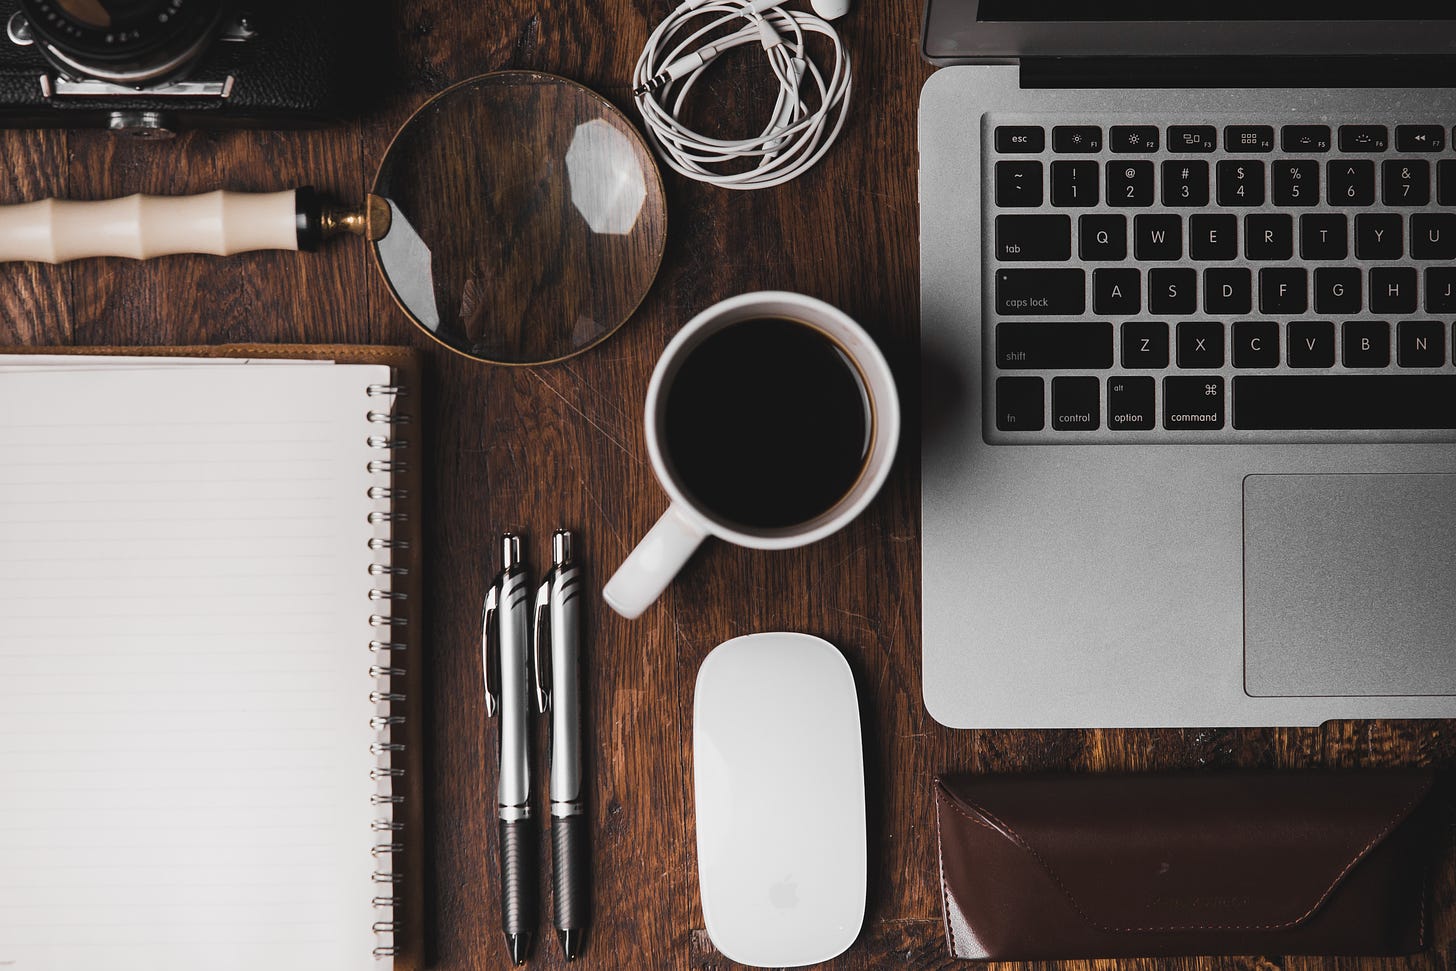 Desktop covered with coffee, computer, mouse, pens, magnifying glass, and other tools by Ian Dooley via Unsplash.